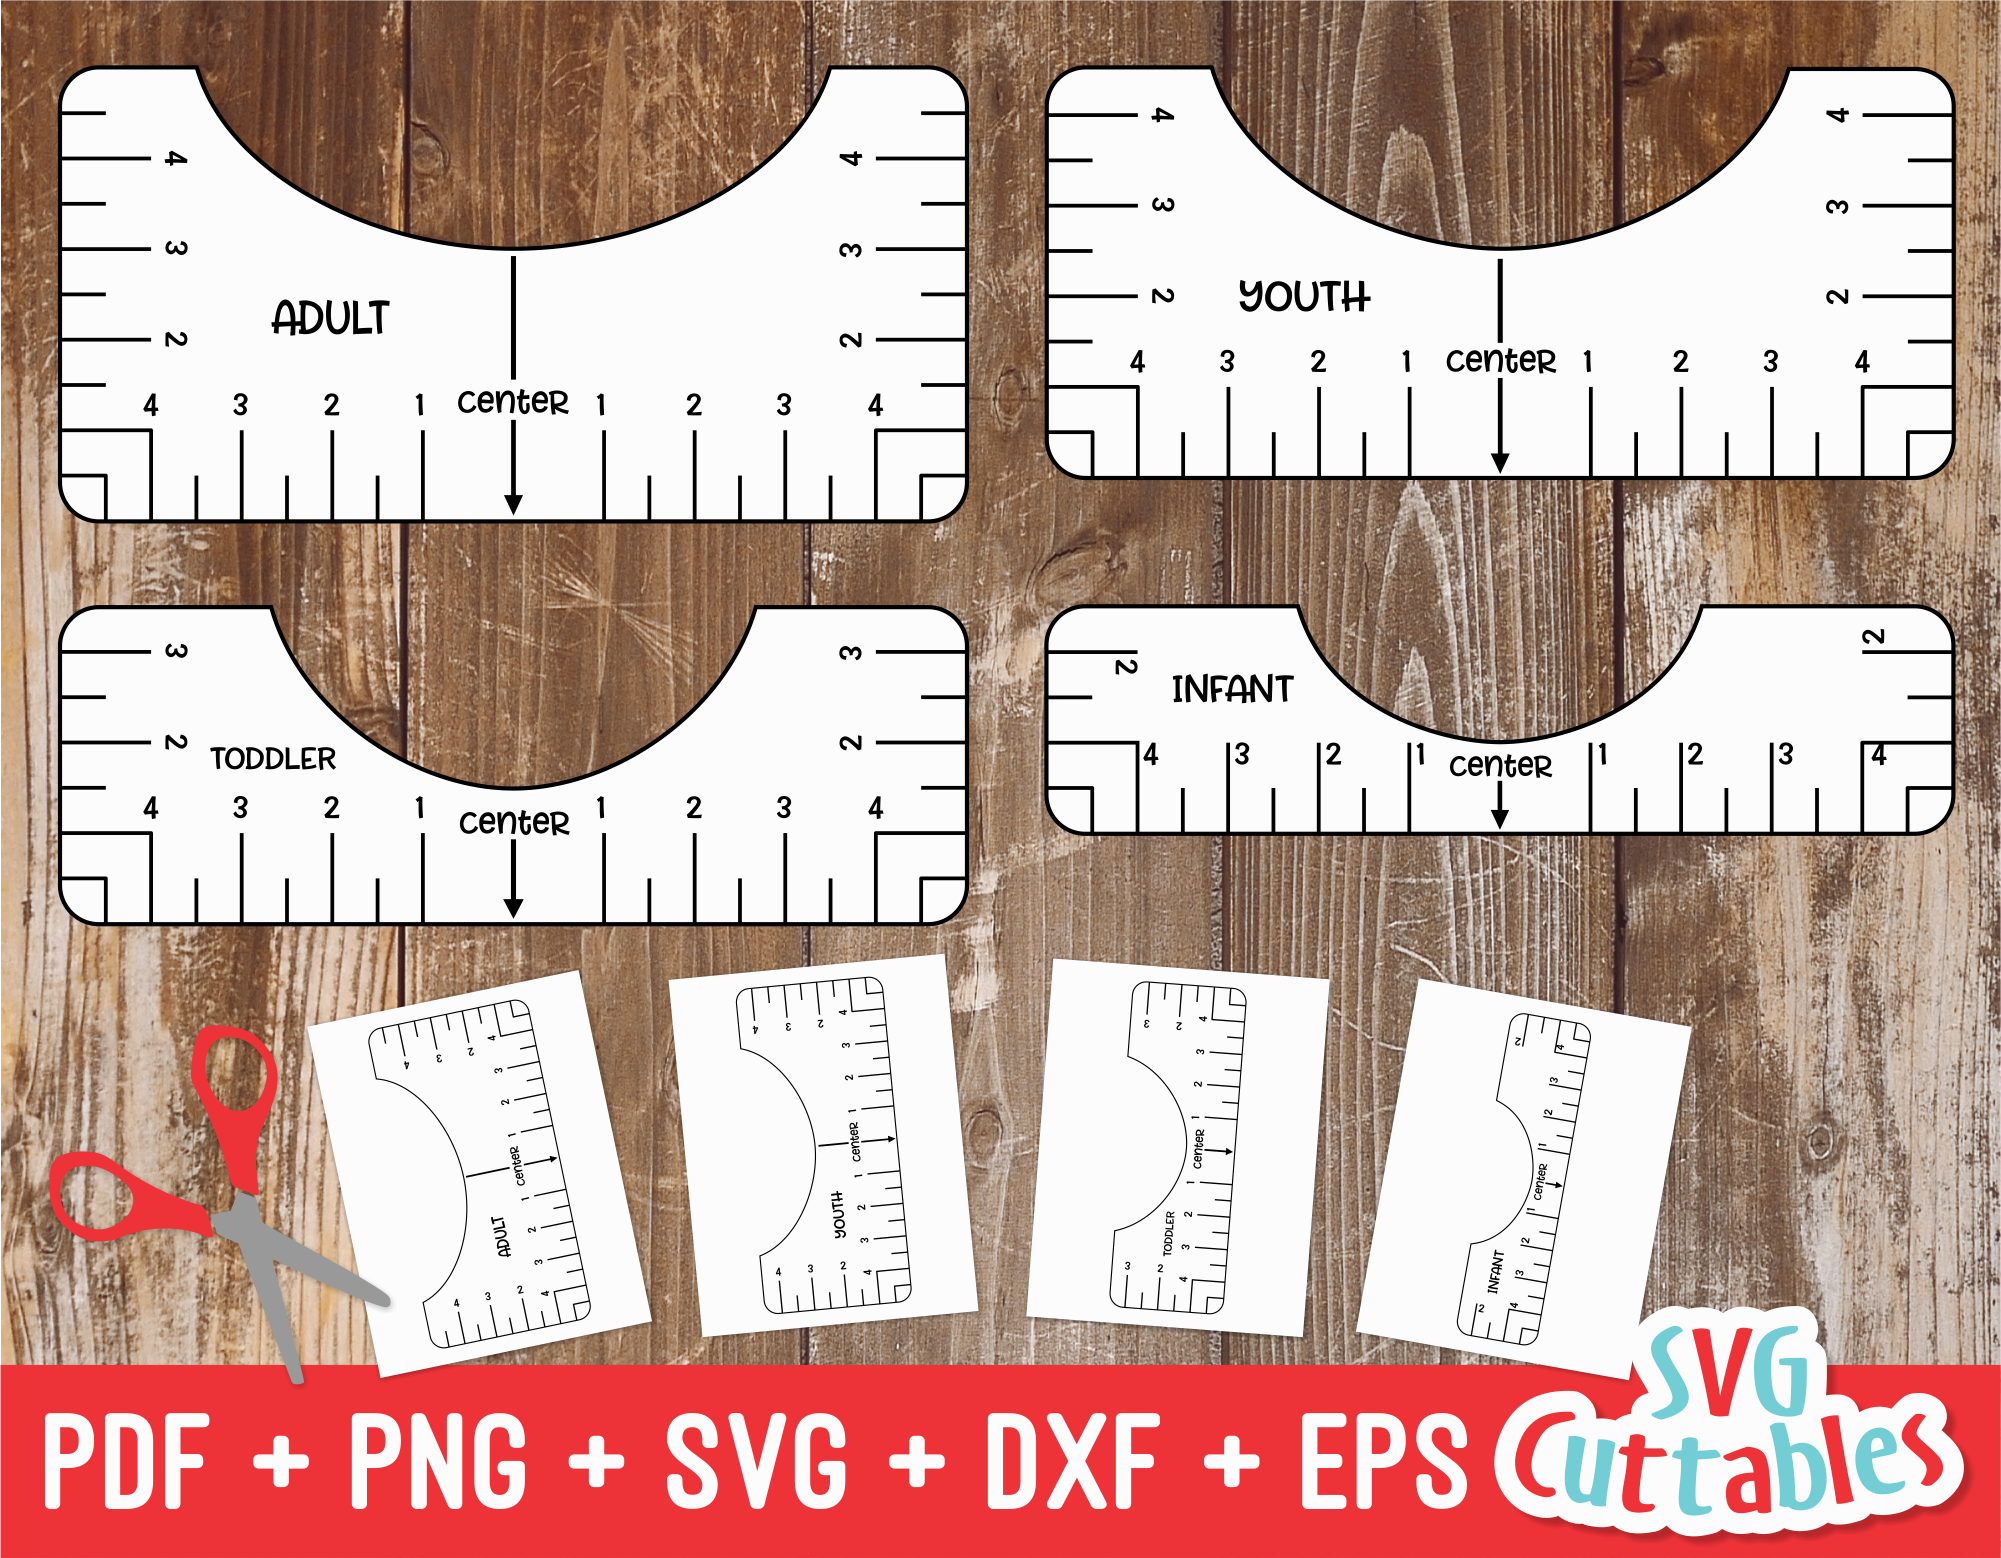 Download T Shirt Alignment Tool Svg Glowforge Files Printable Pdf T Shirt Ruler Guide Files Tshirt Centering Tool Svg Cut Files Tshirt Ruler Svg Digital Art Collectibles Yenmotion Com